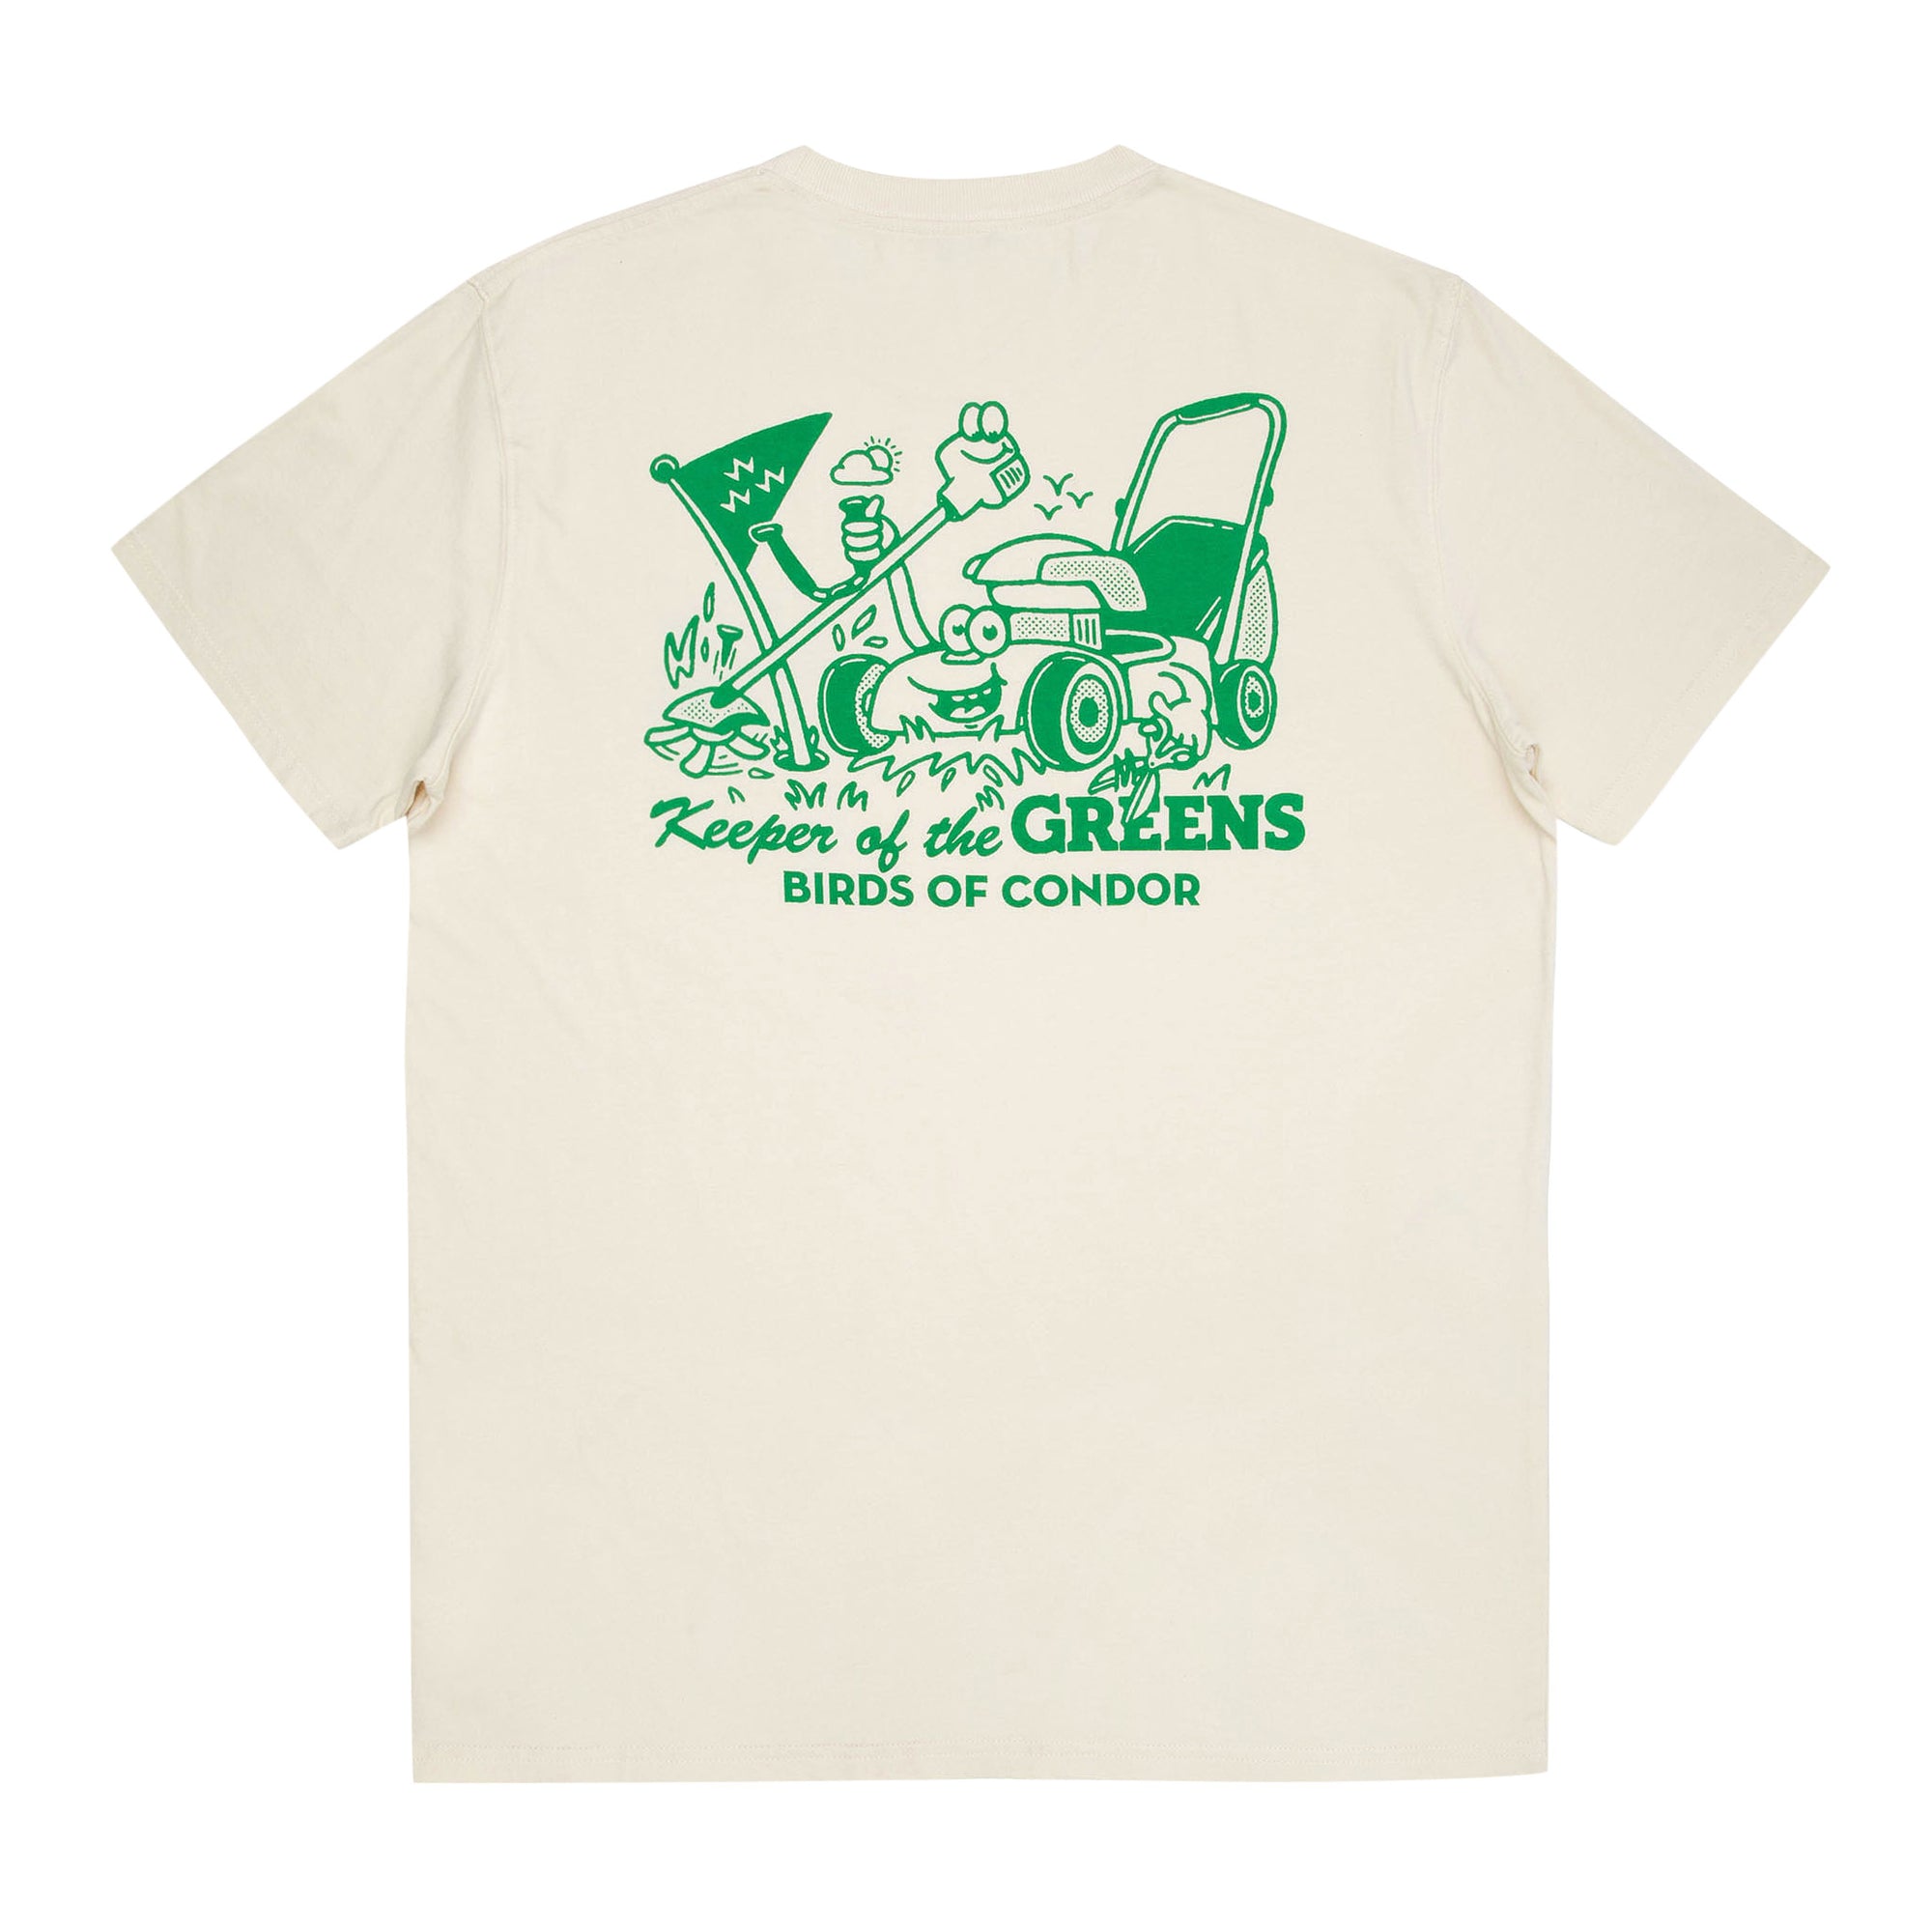 birds of condor keeper of the greens lawn mower weed whacker garden care t-shirt